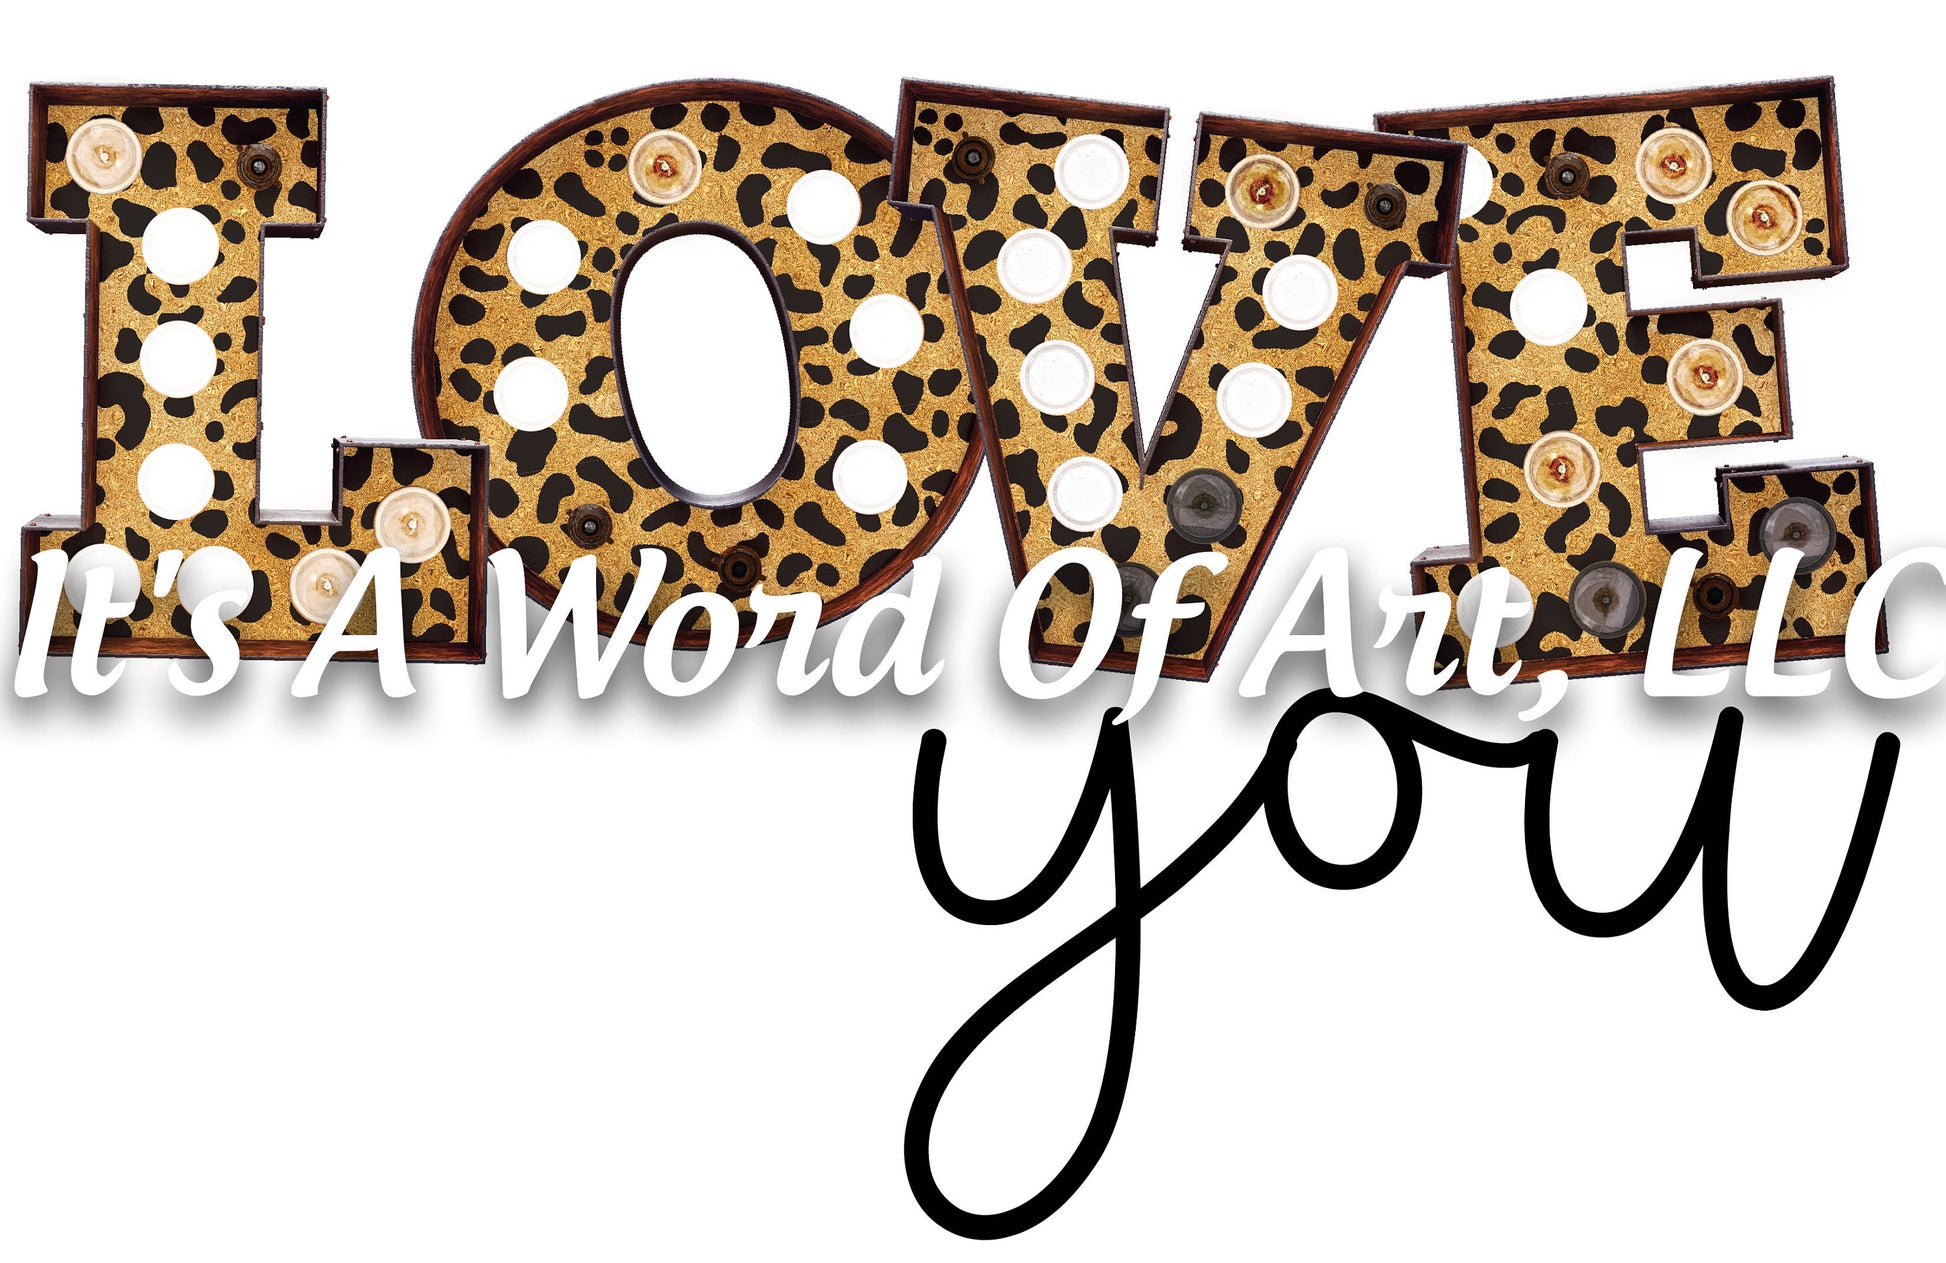 Valentines Day 39 - Love you Leopard - Sublimation Transfer Set/Ready To Press Sublimation Transfer/Sublimation Transfer